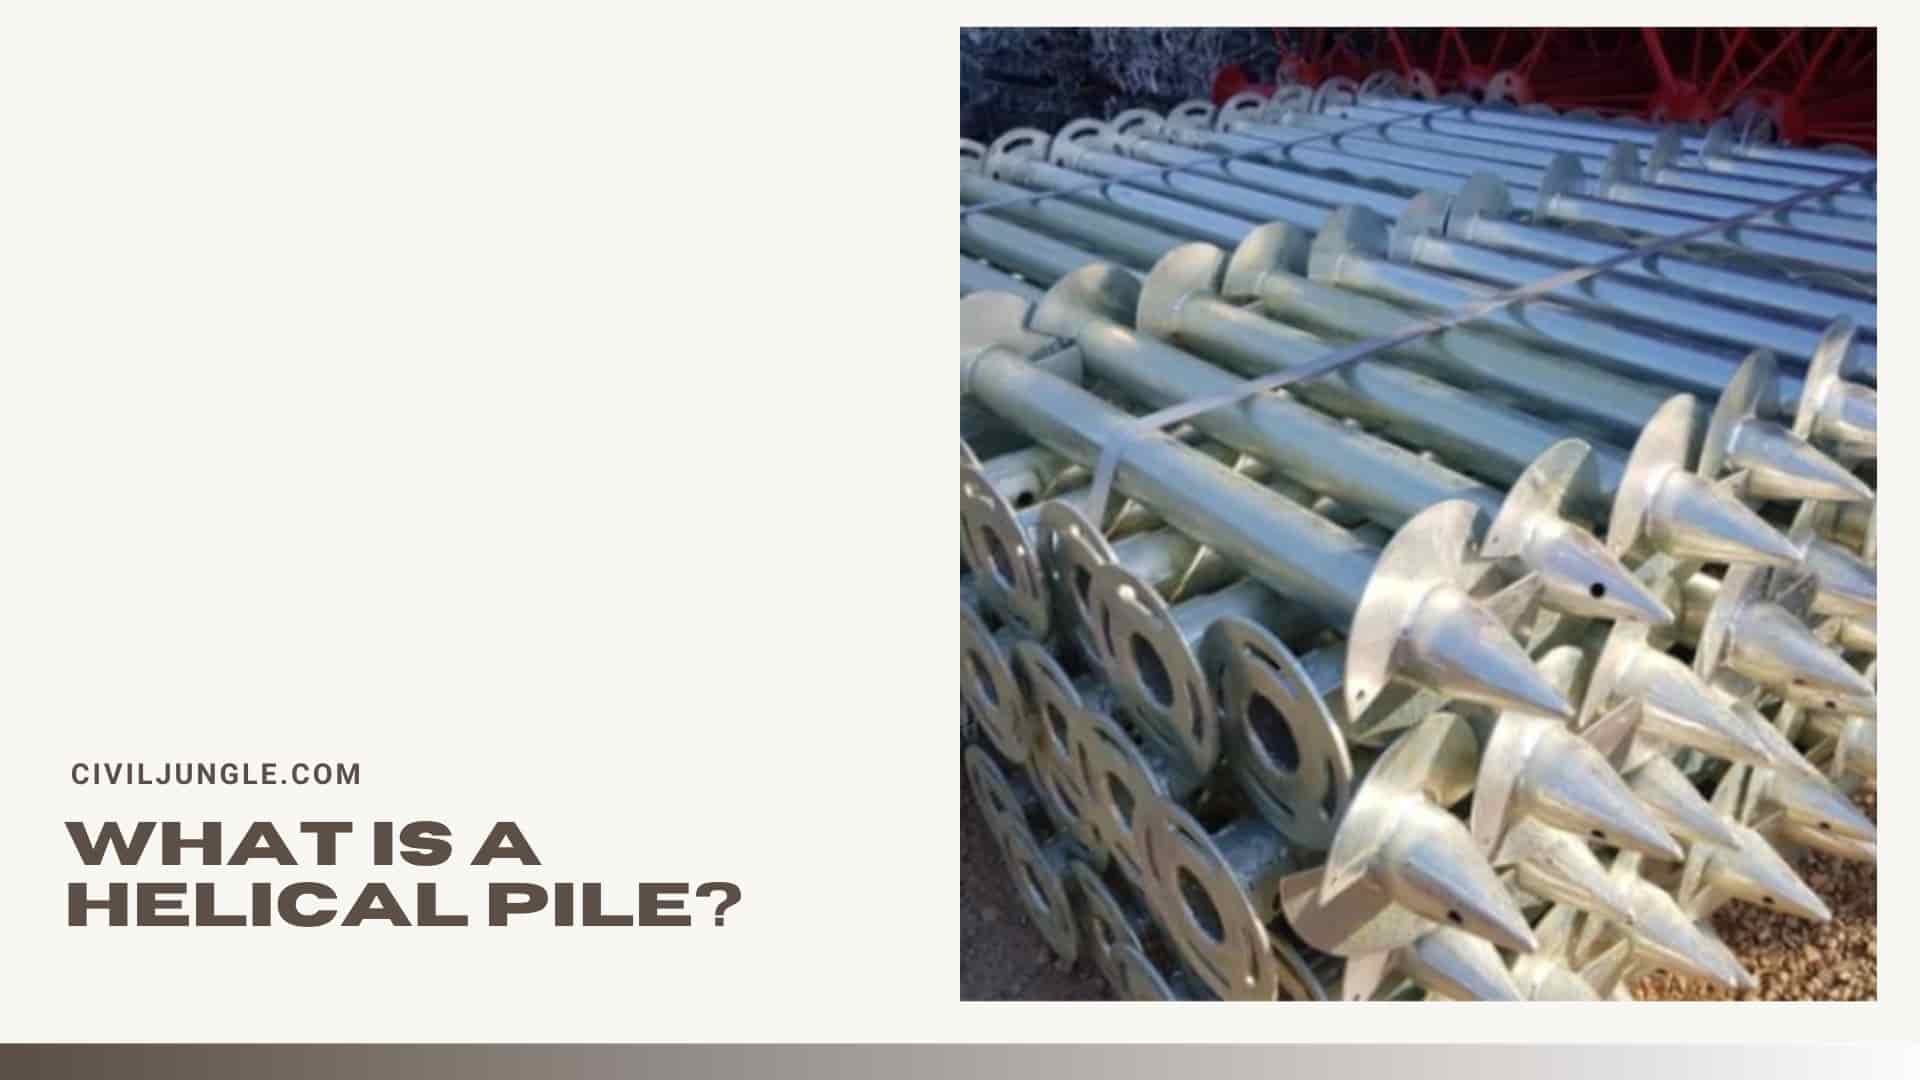 What Is a Helical Pile?